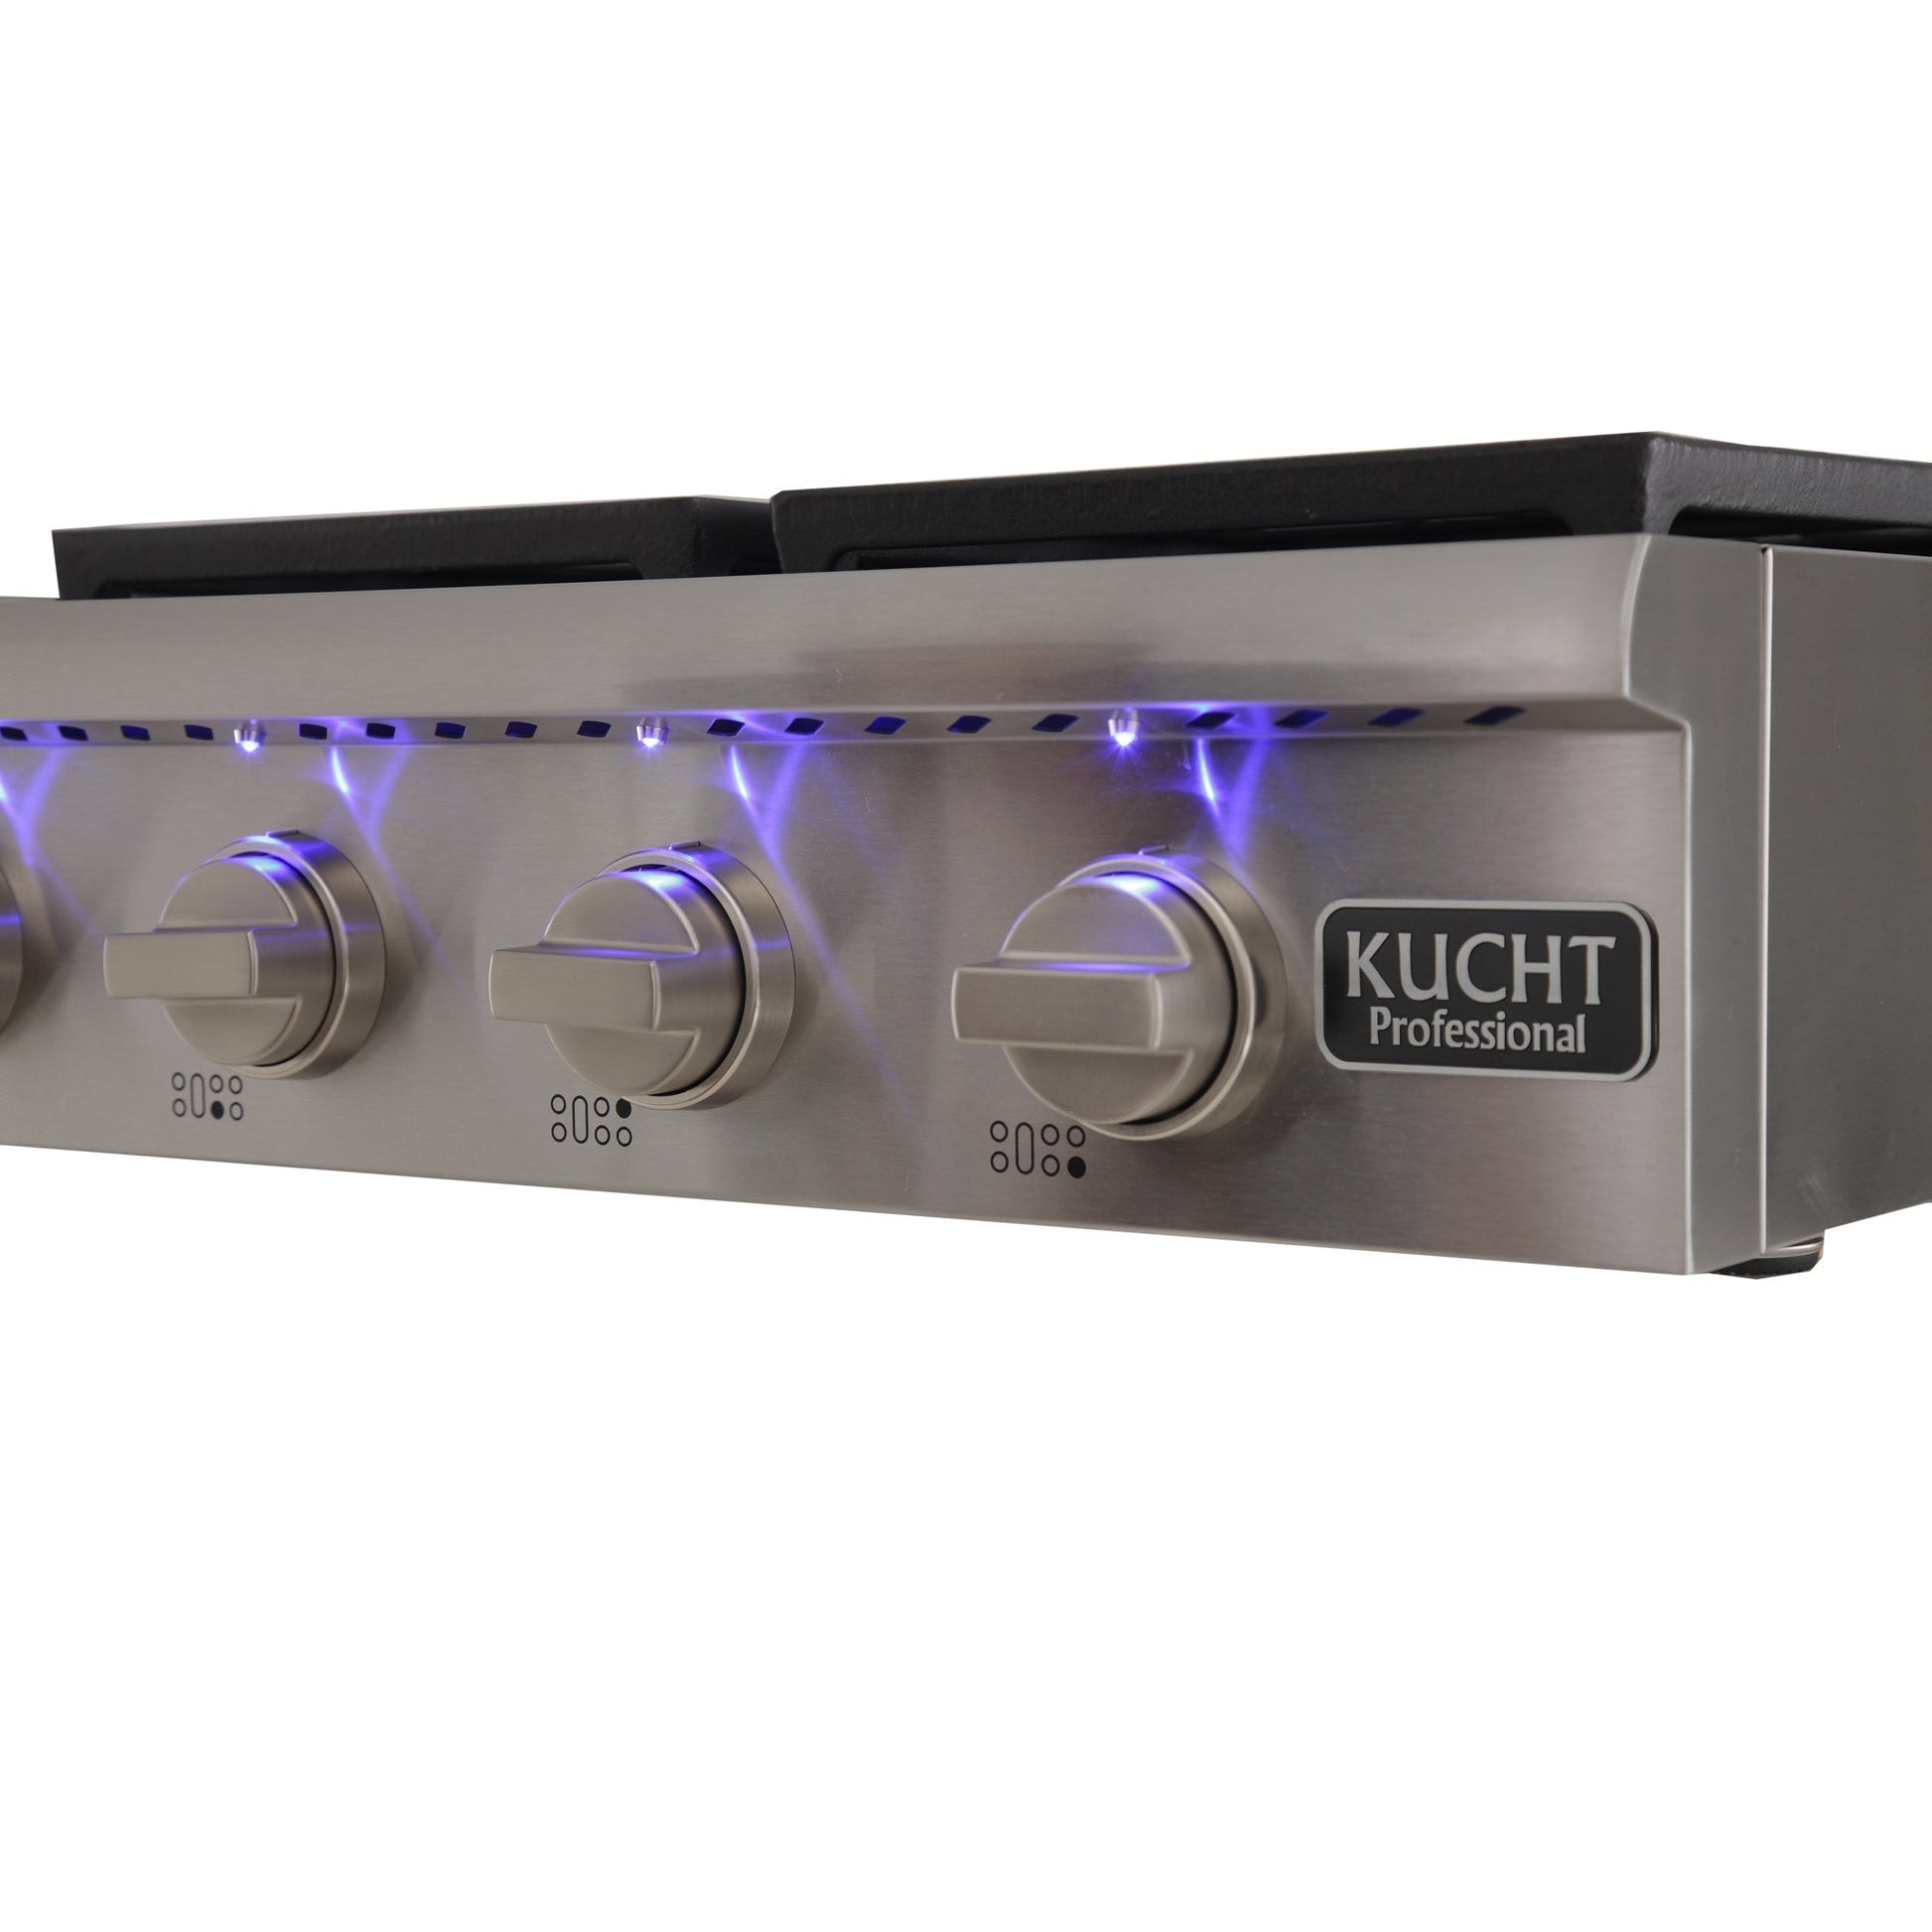 Kucht KRT Series 48" Propane Gas Range-Top With 6 Burners, Griddle and Royal Blue Knobs